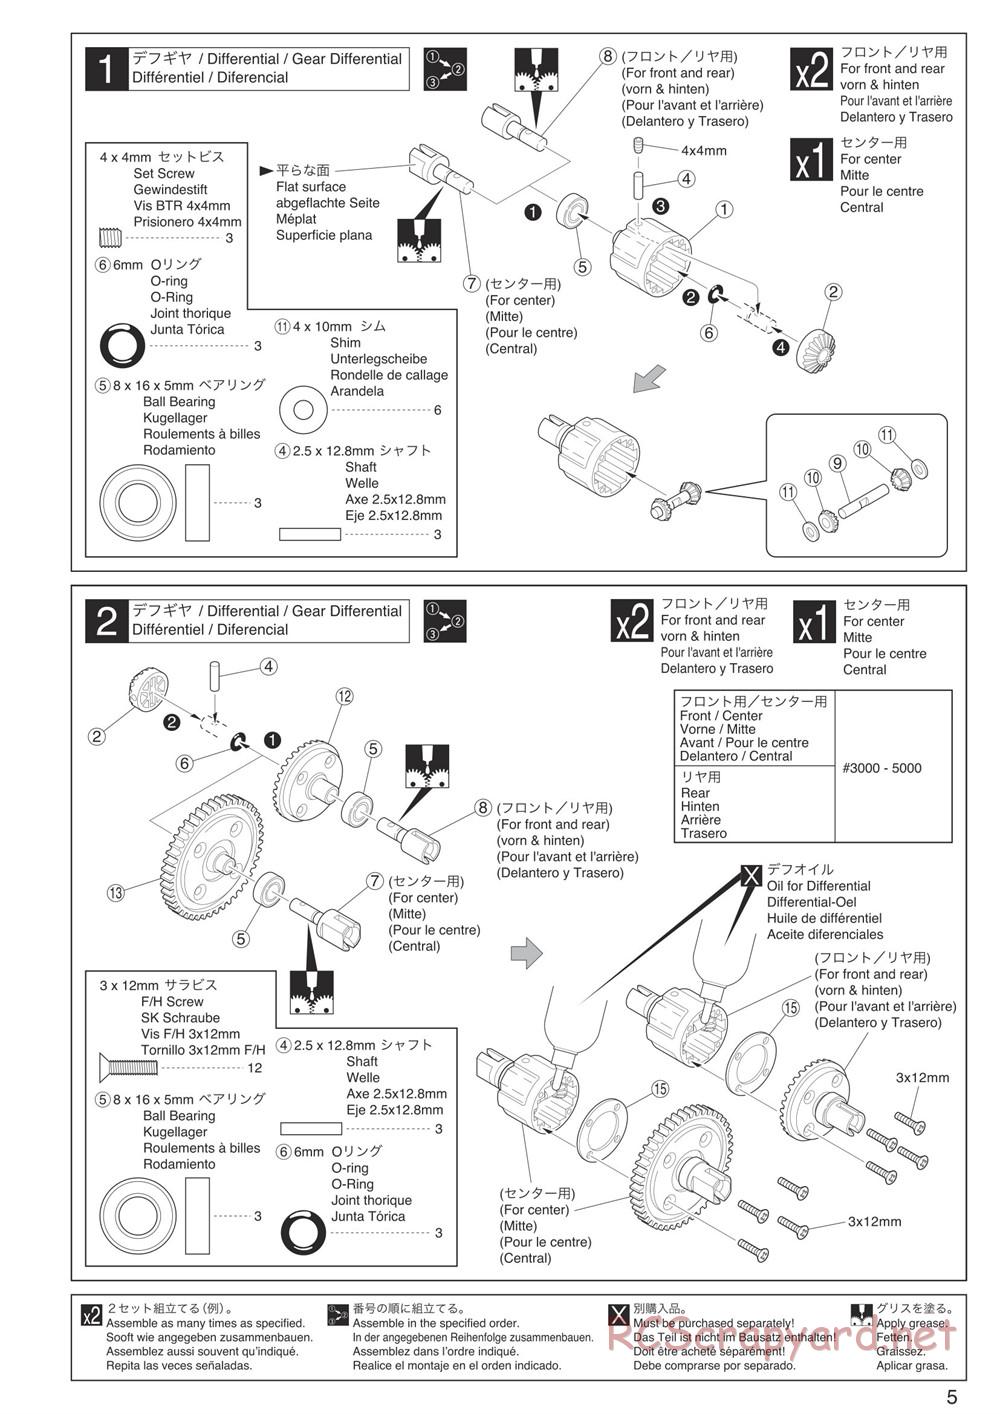 Kyosho - Inferno Neo 3.0 - Manual - Page 5